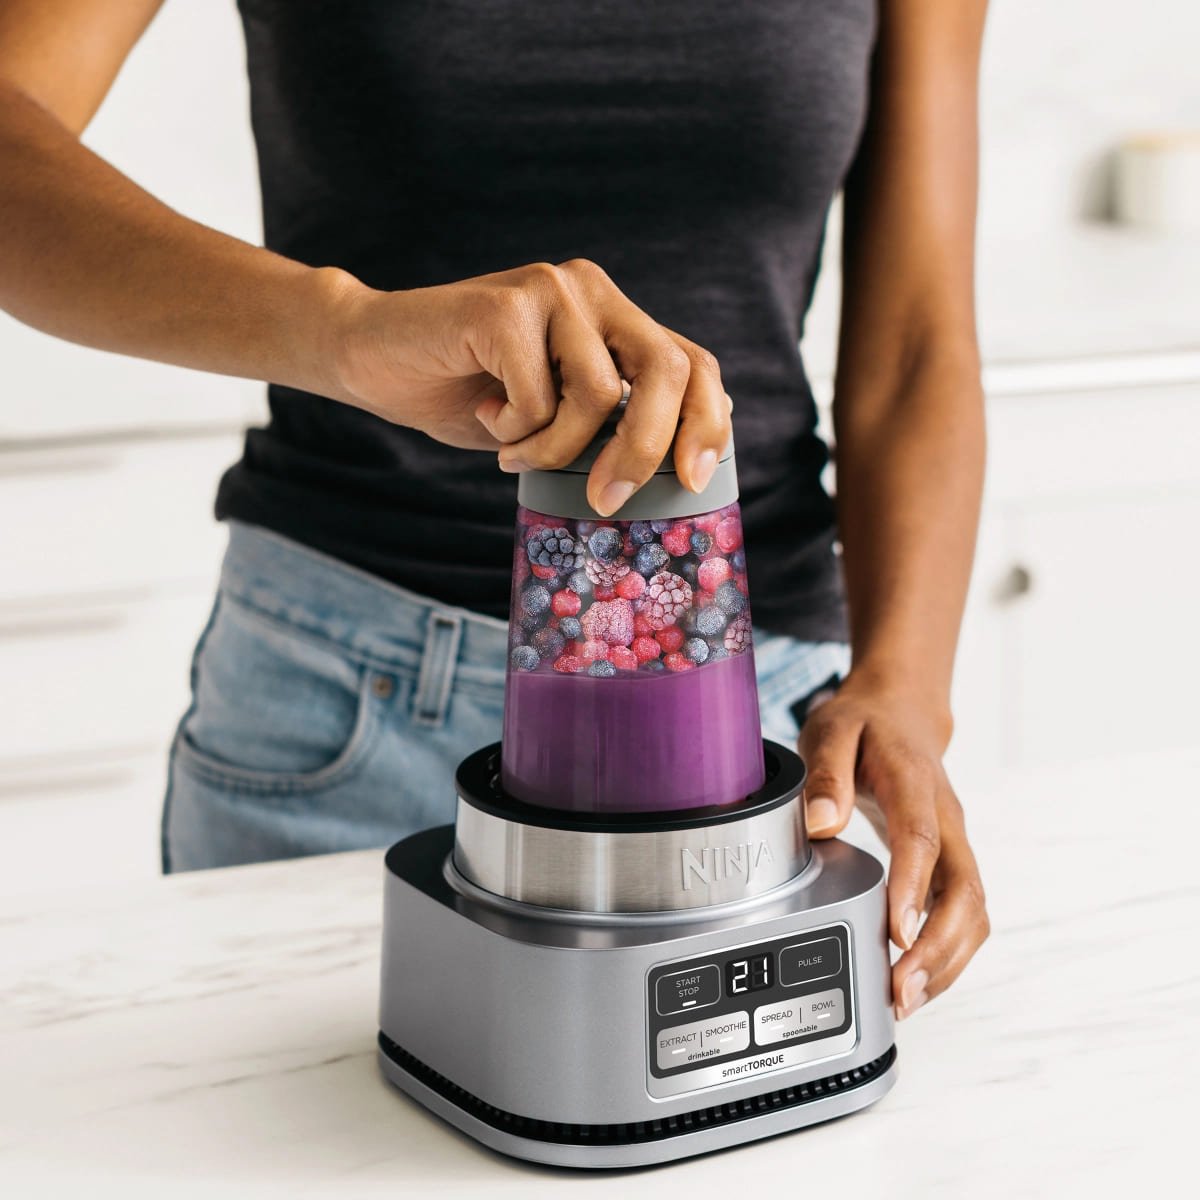 Ninja Foodi Smoothie Bowl Maker and Nutrient Extractor Blender from Target